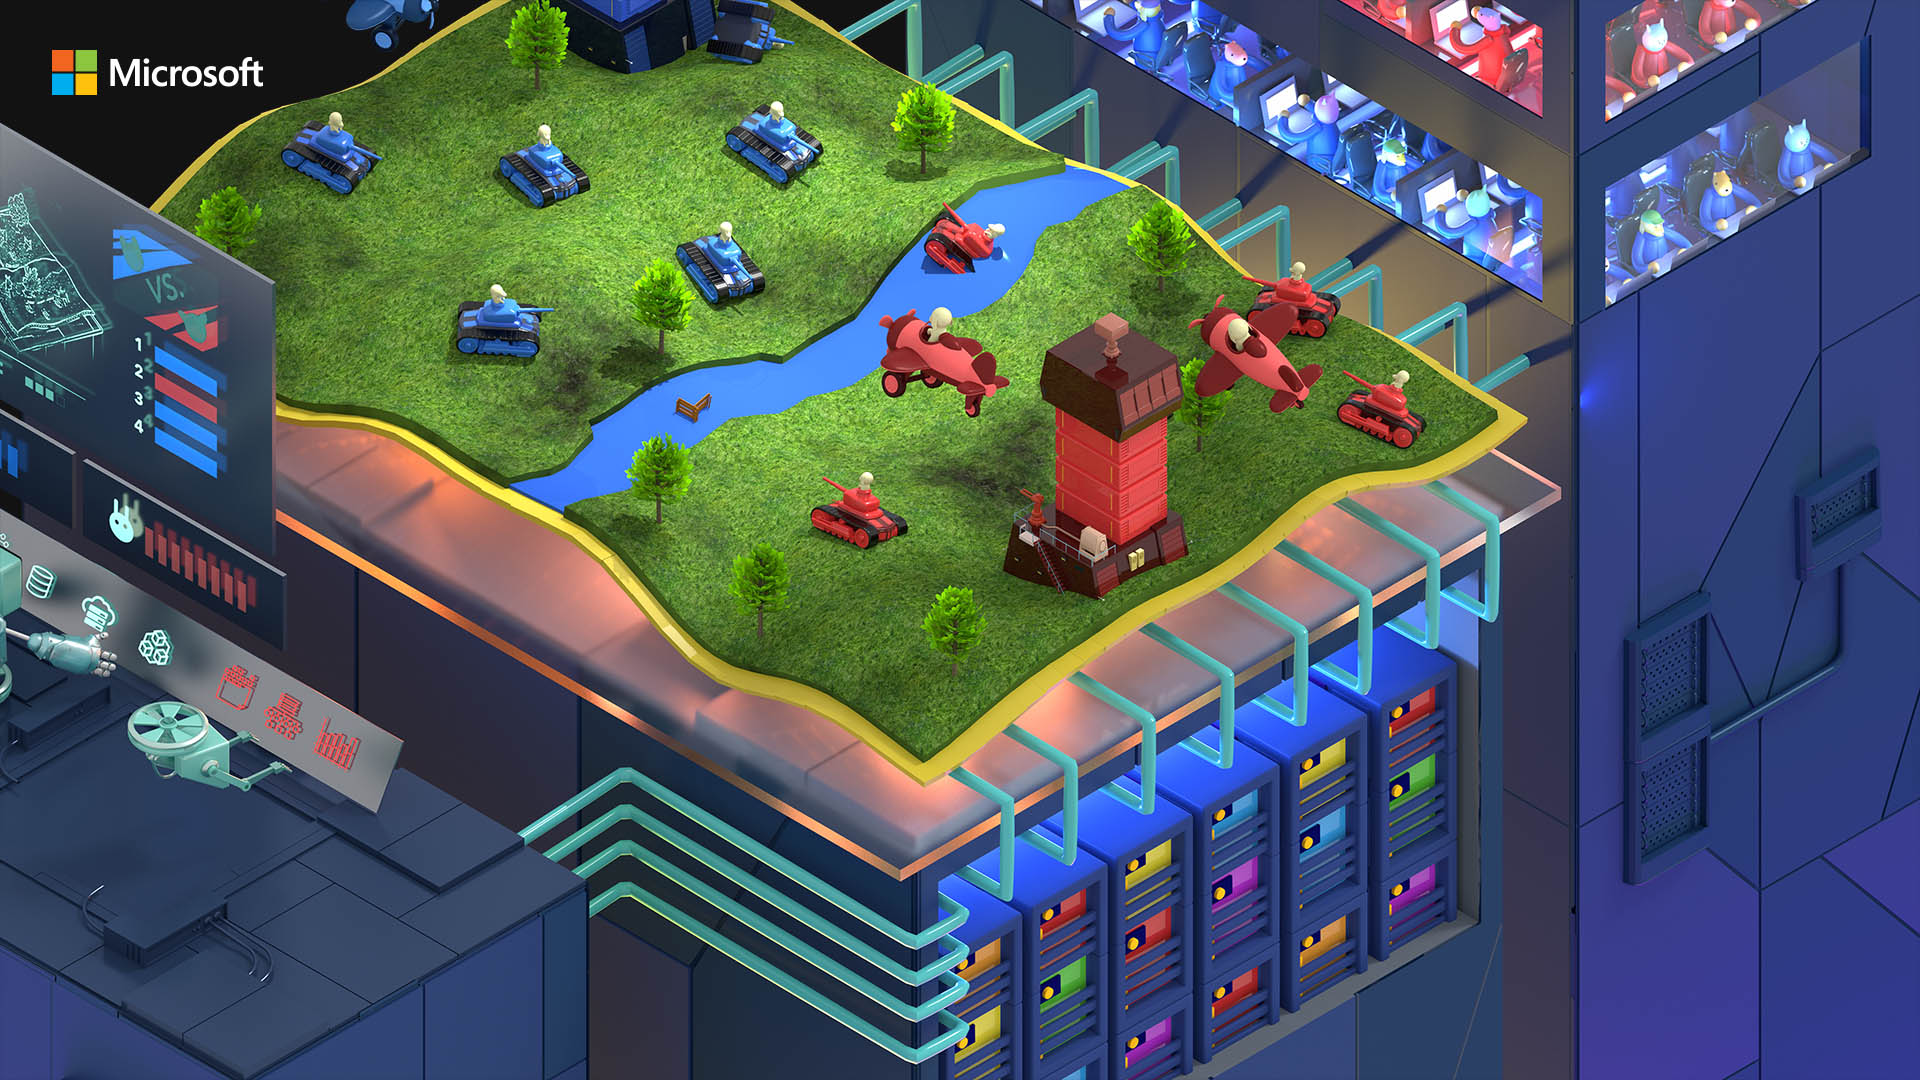 Make believe game art with a green field with blue and red tanks in battle